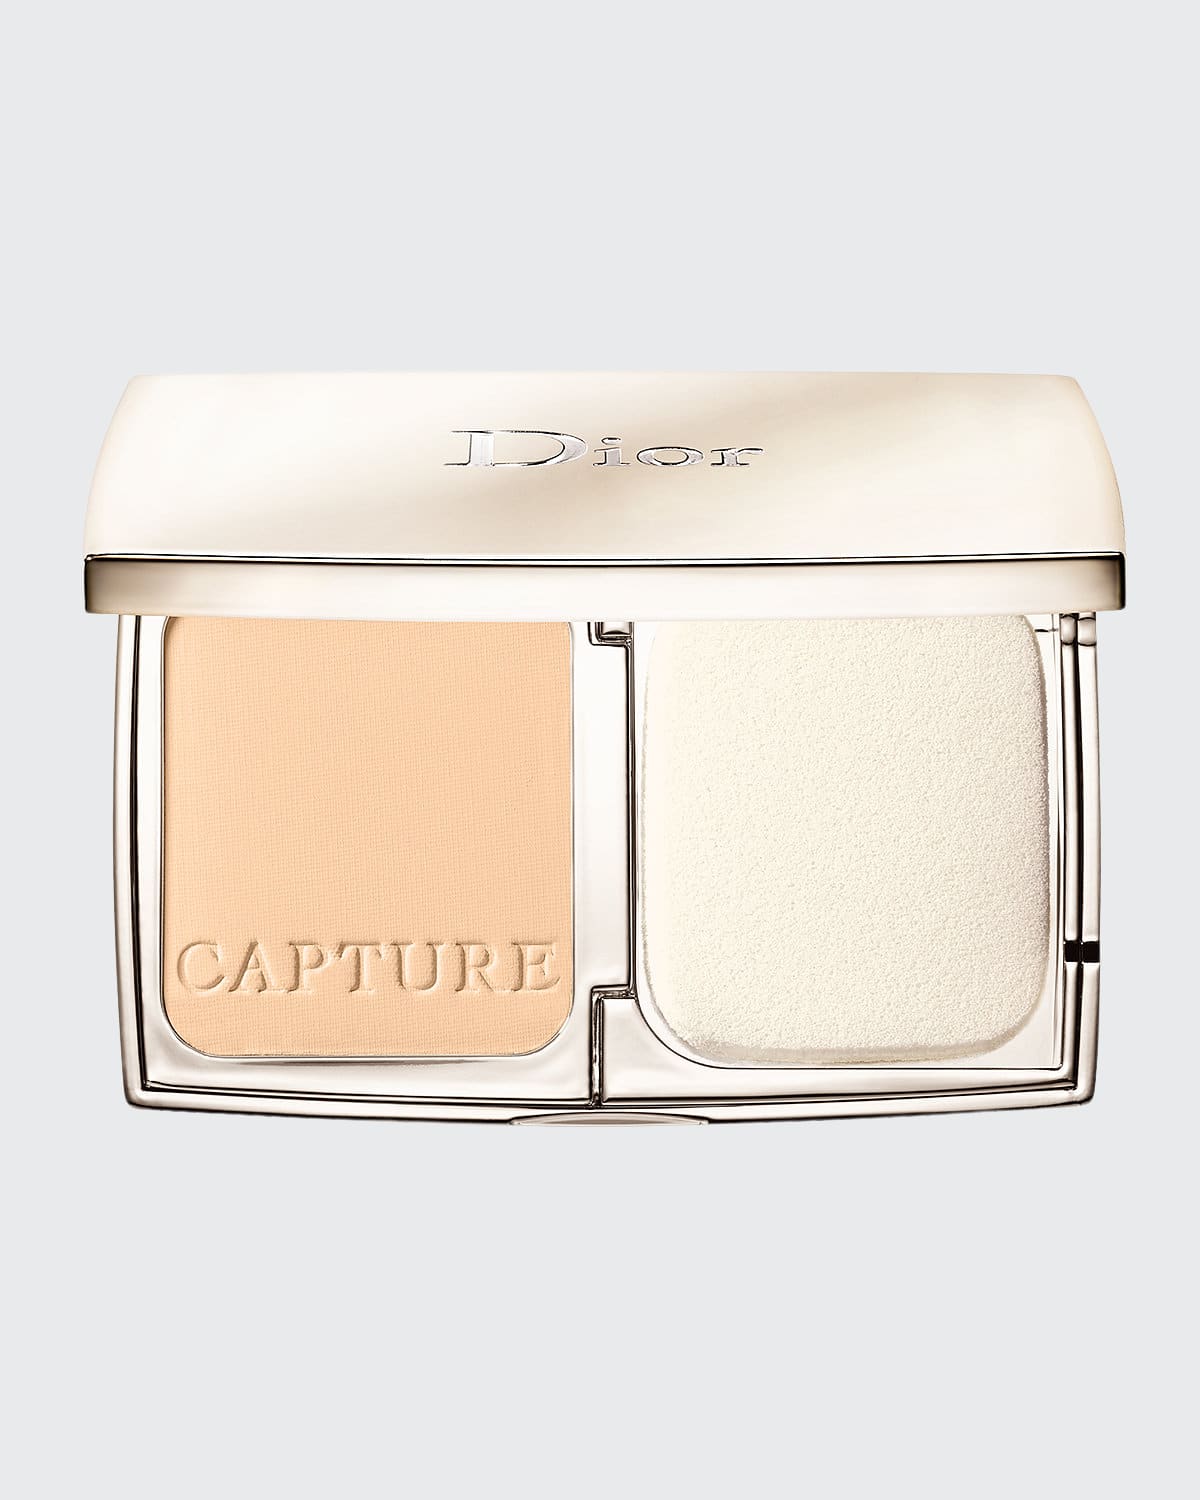 Dior Capture Totale Compact Foundation In 10 Ivory